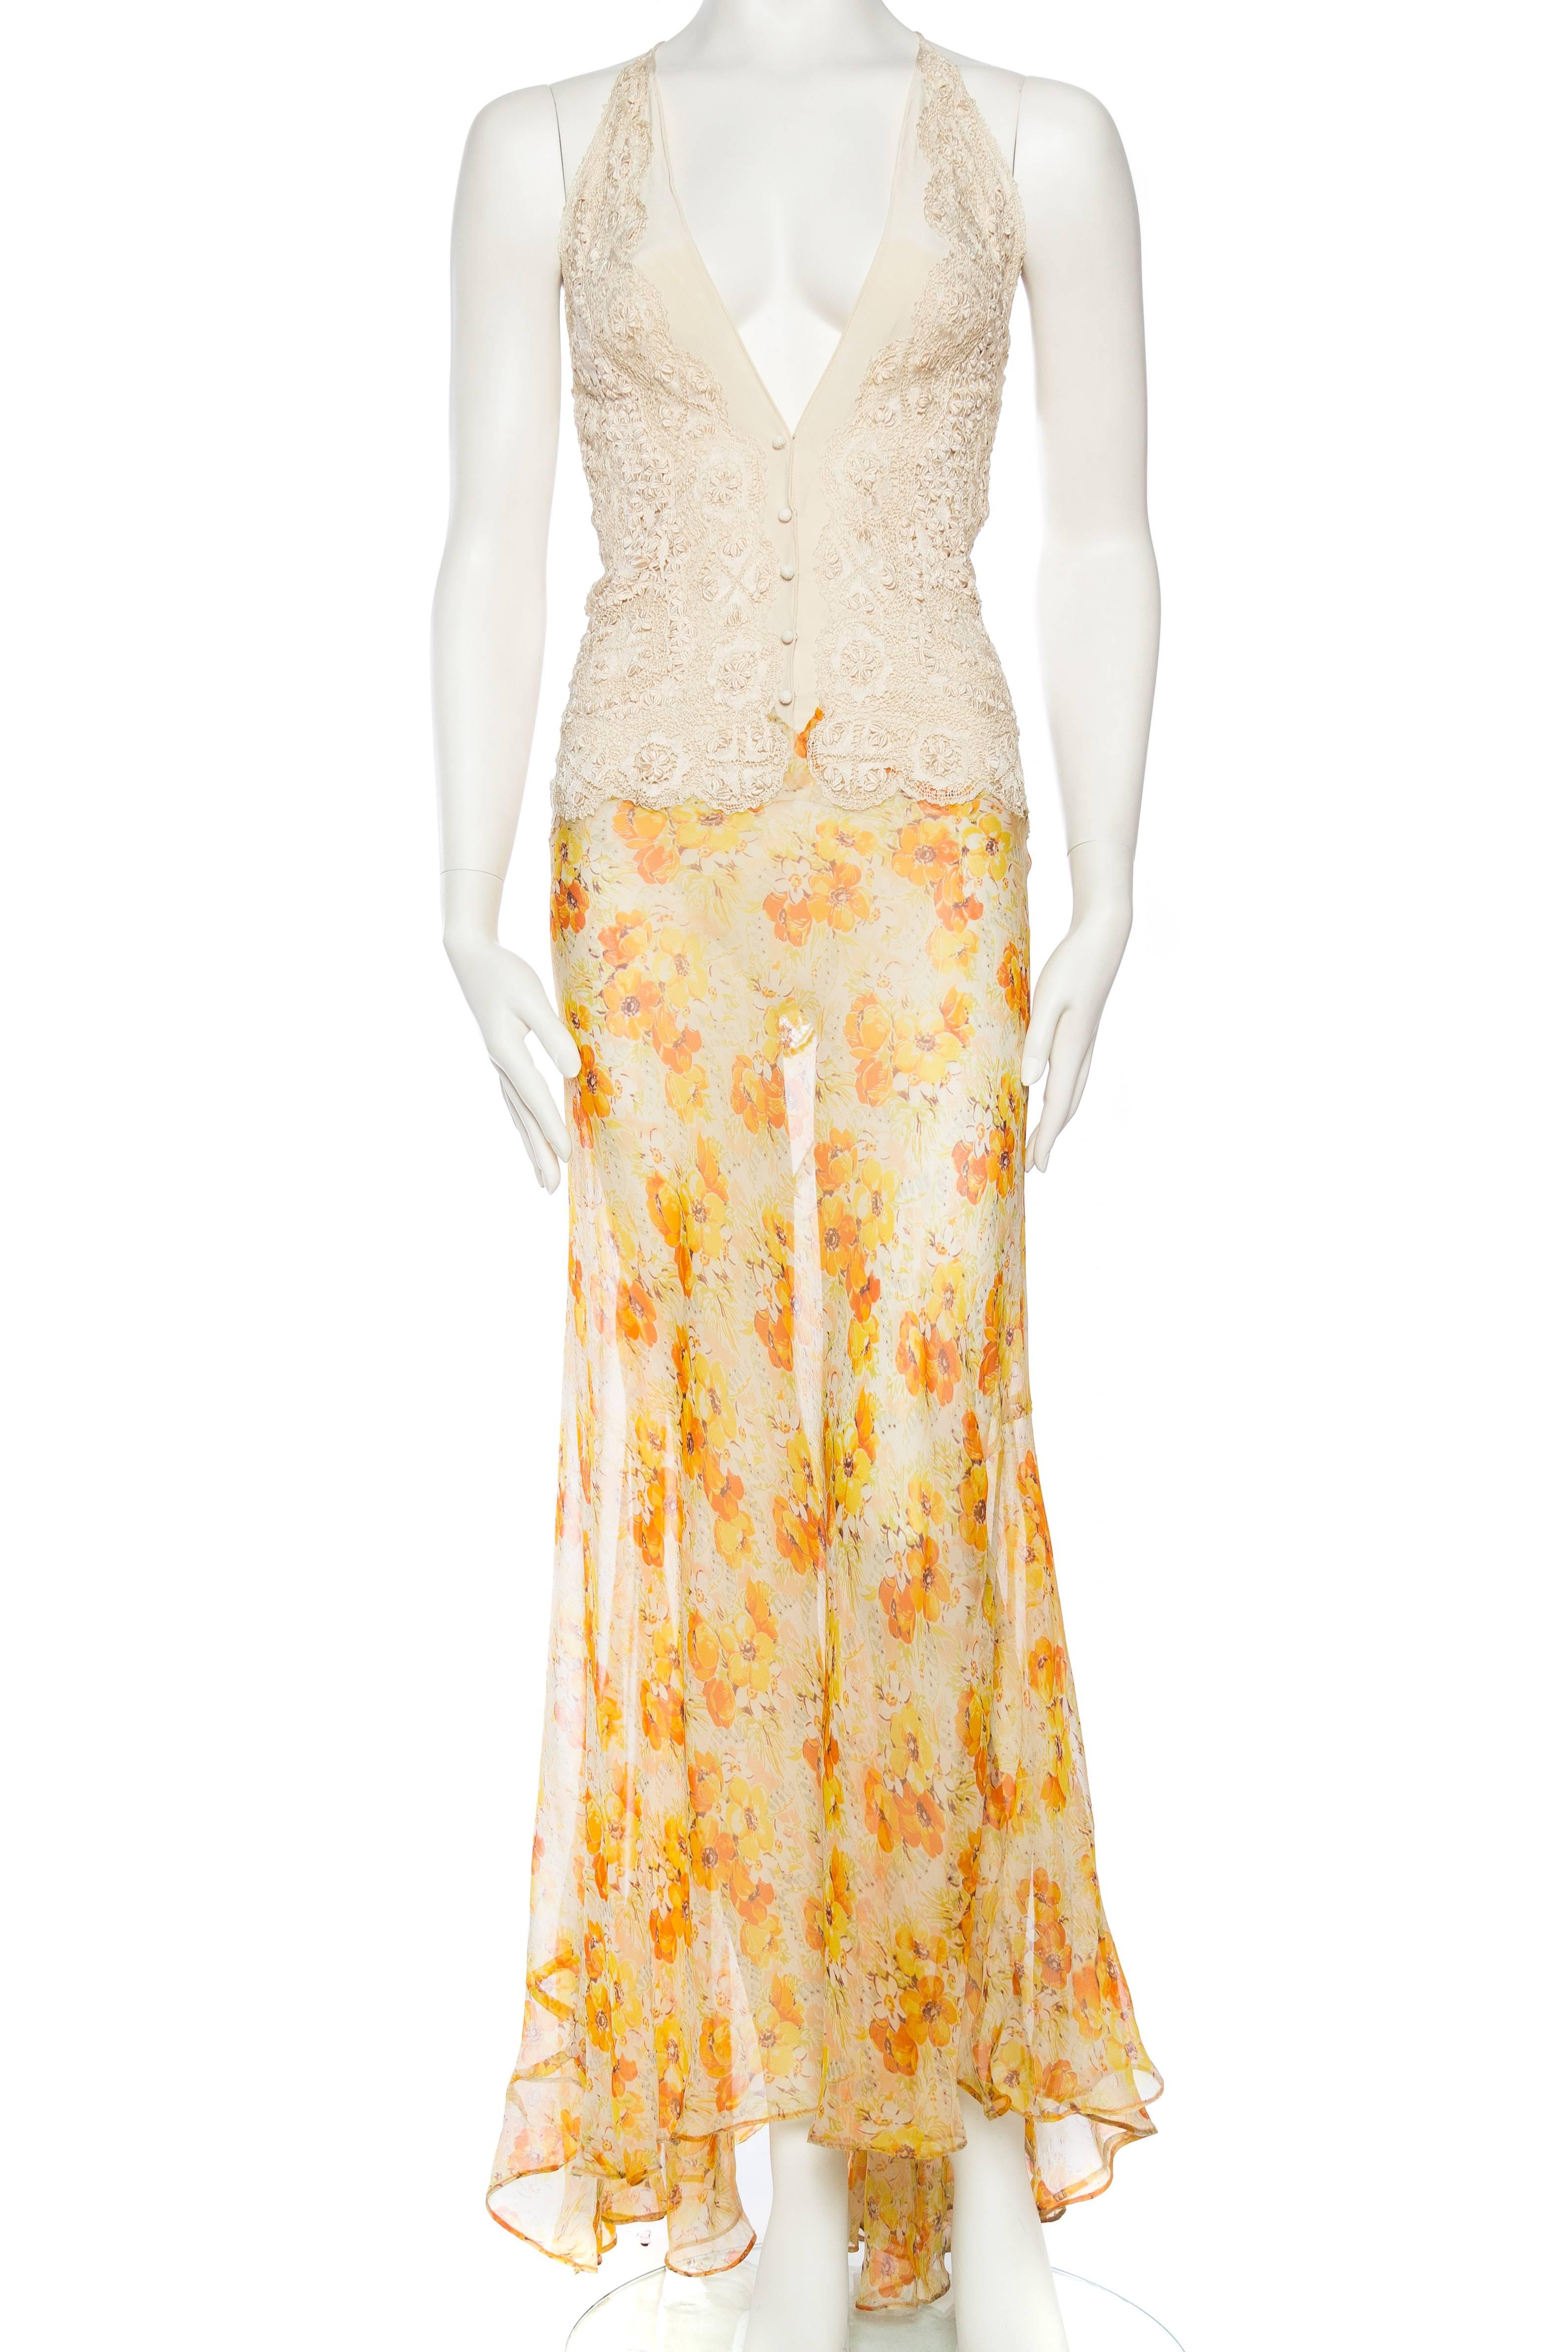 MORPHEW COLLECTION Ivory Backless Dress Made Of Hand Victorian Silk Lace And 1930S Floral Chiffon